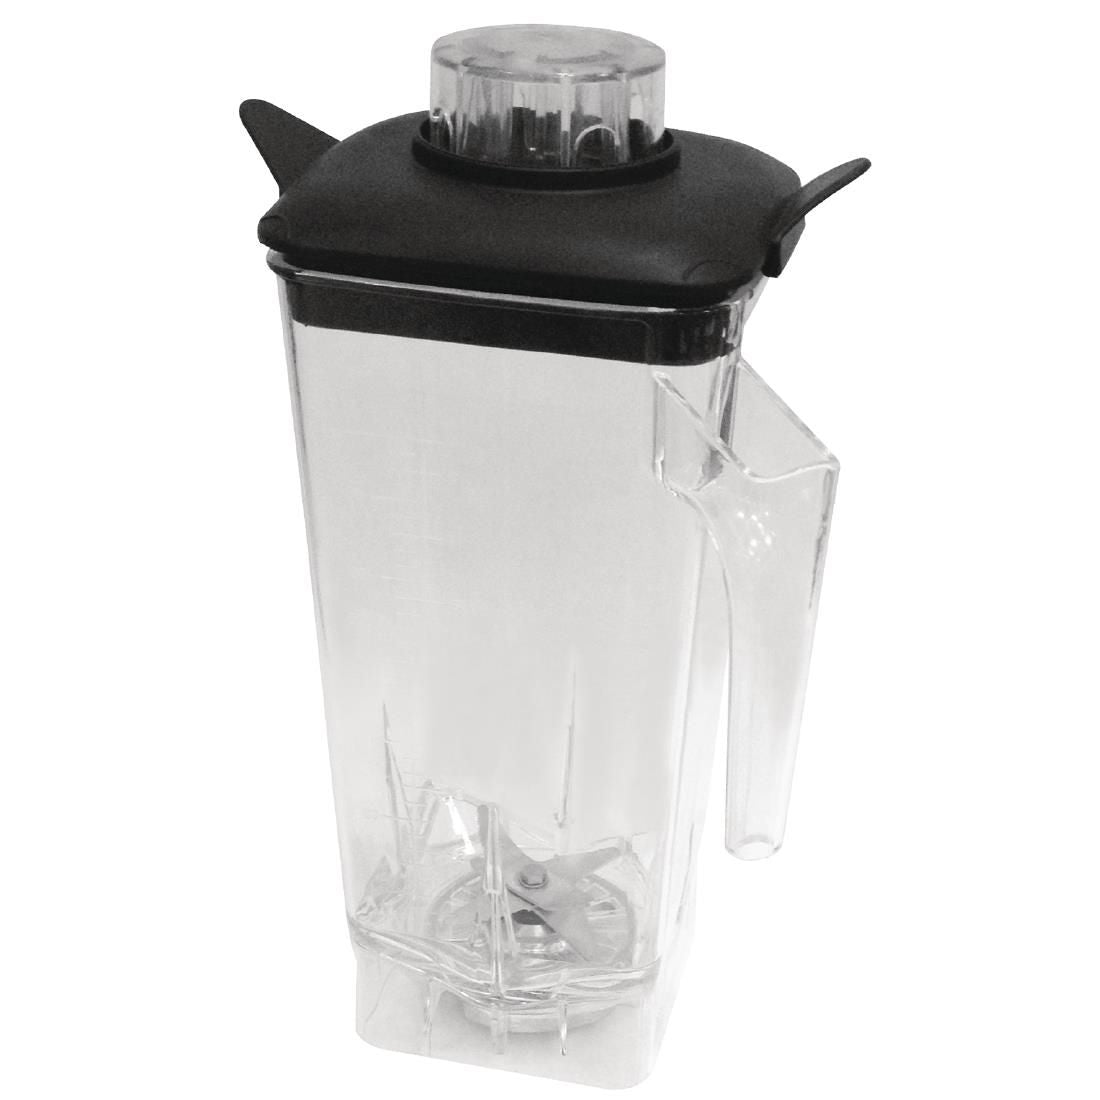 AD719 Buffalo Replacement Polycarbonate Jug with Blade JD Catering Equipment Solutions Ltd